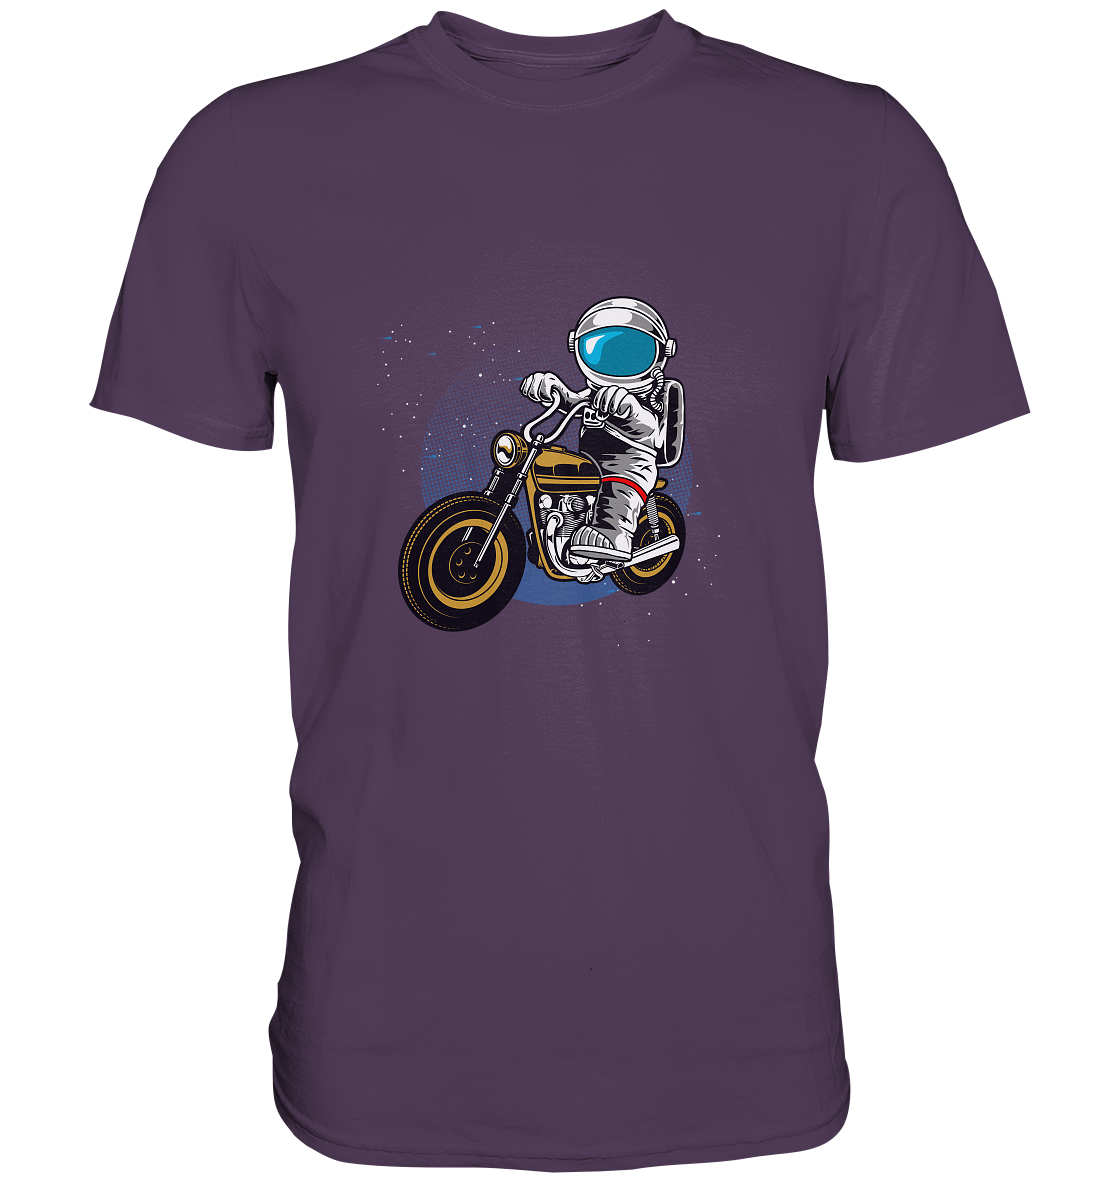 Fly me to the moon - Premium Unisex Shirt - mehrere Farben